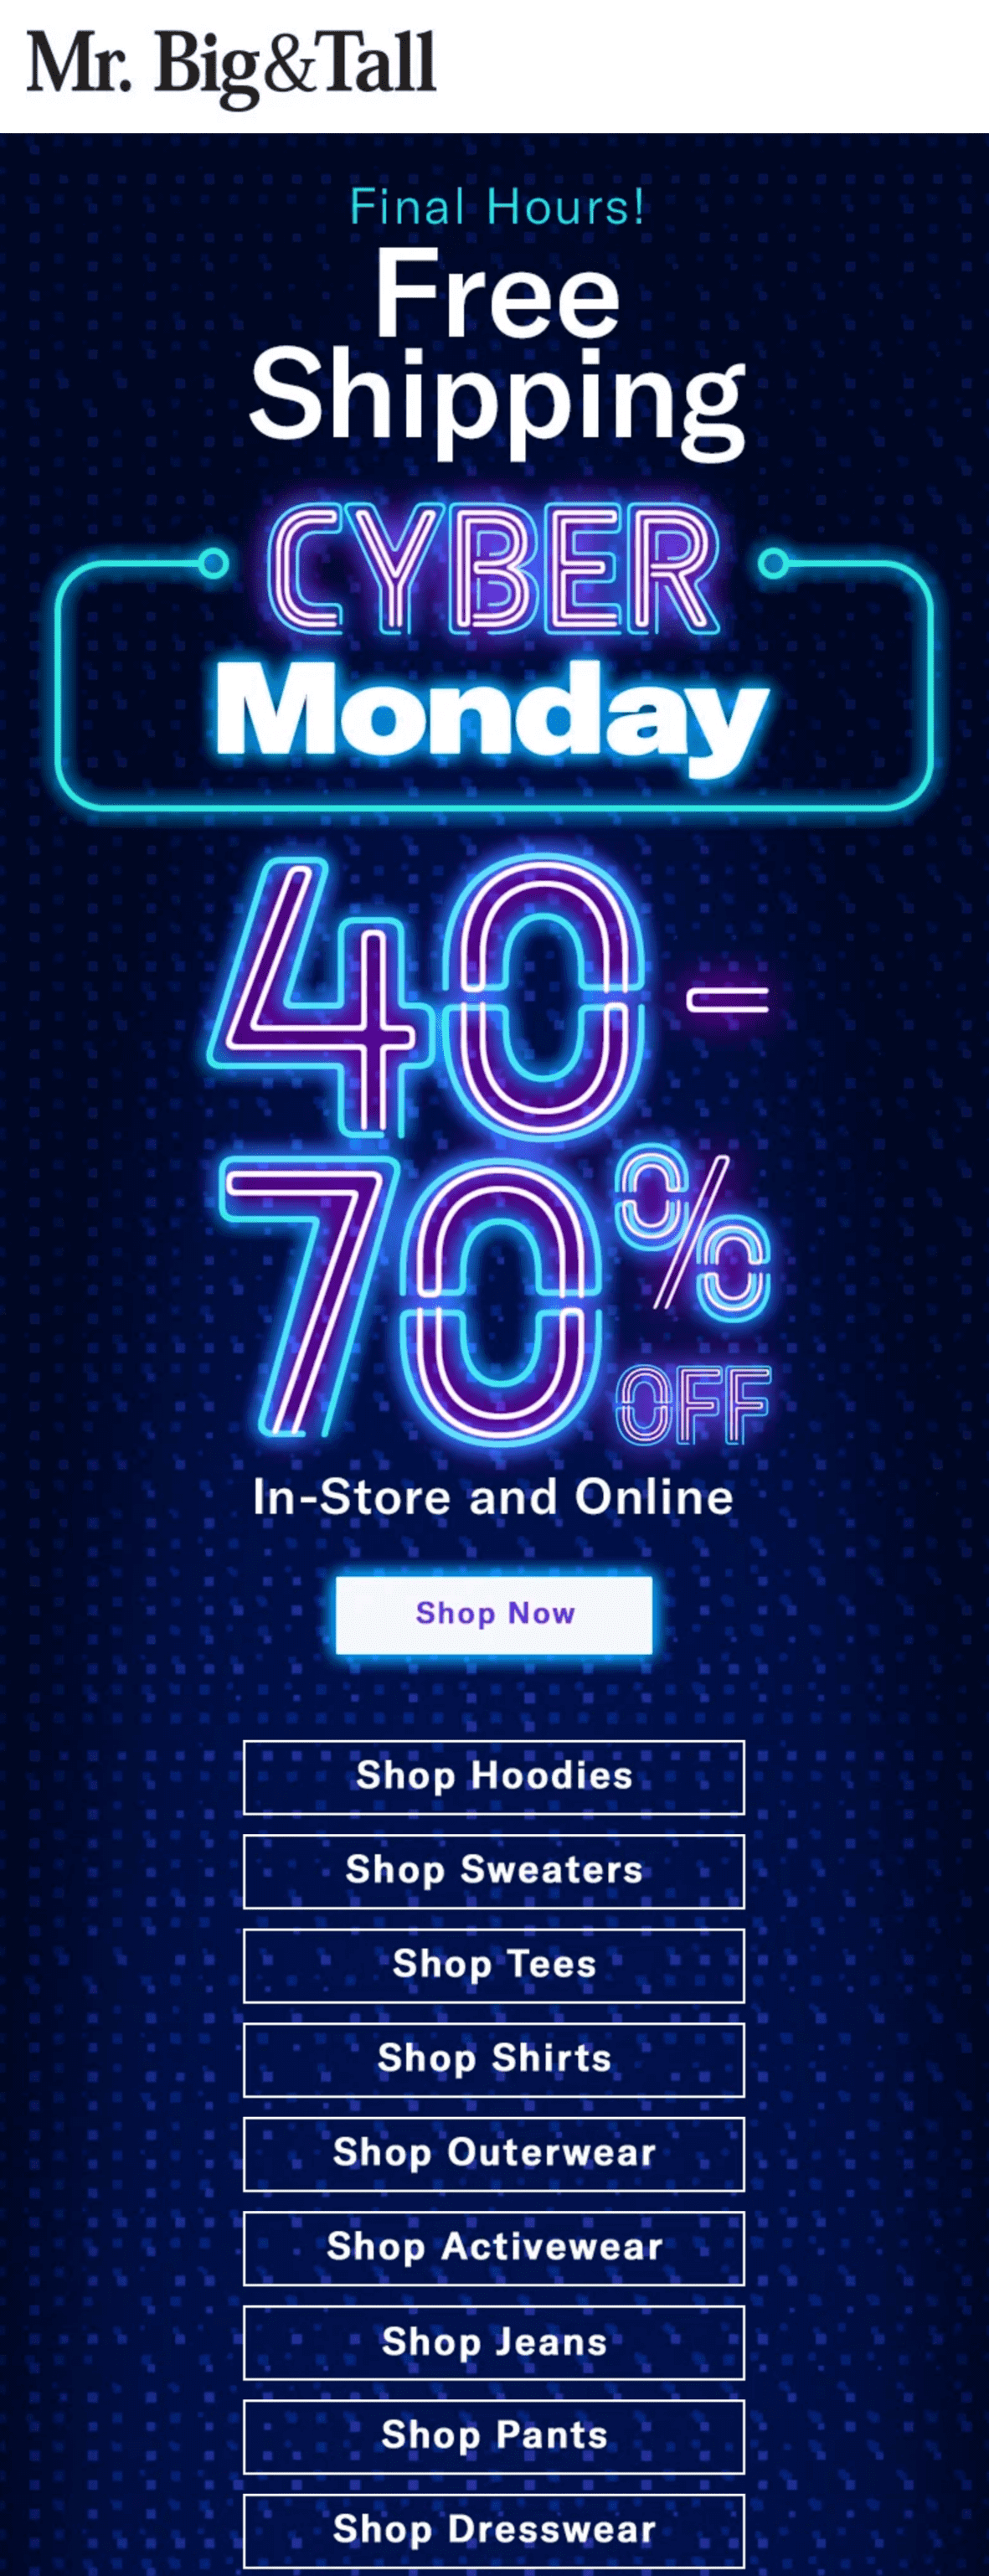 A Cyber Monday email with text imitating neon signs